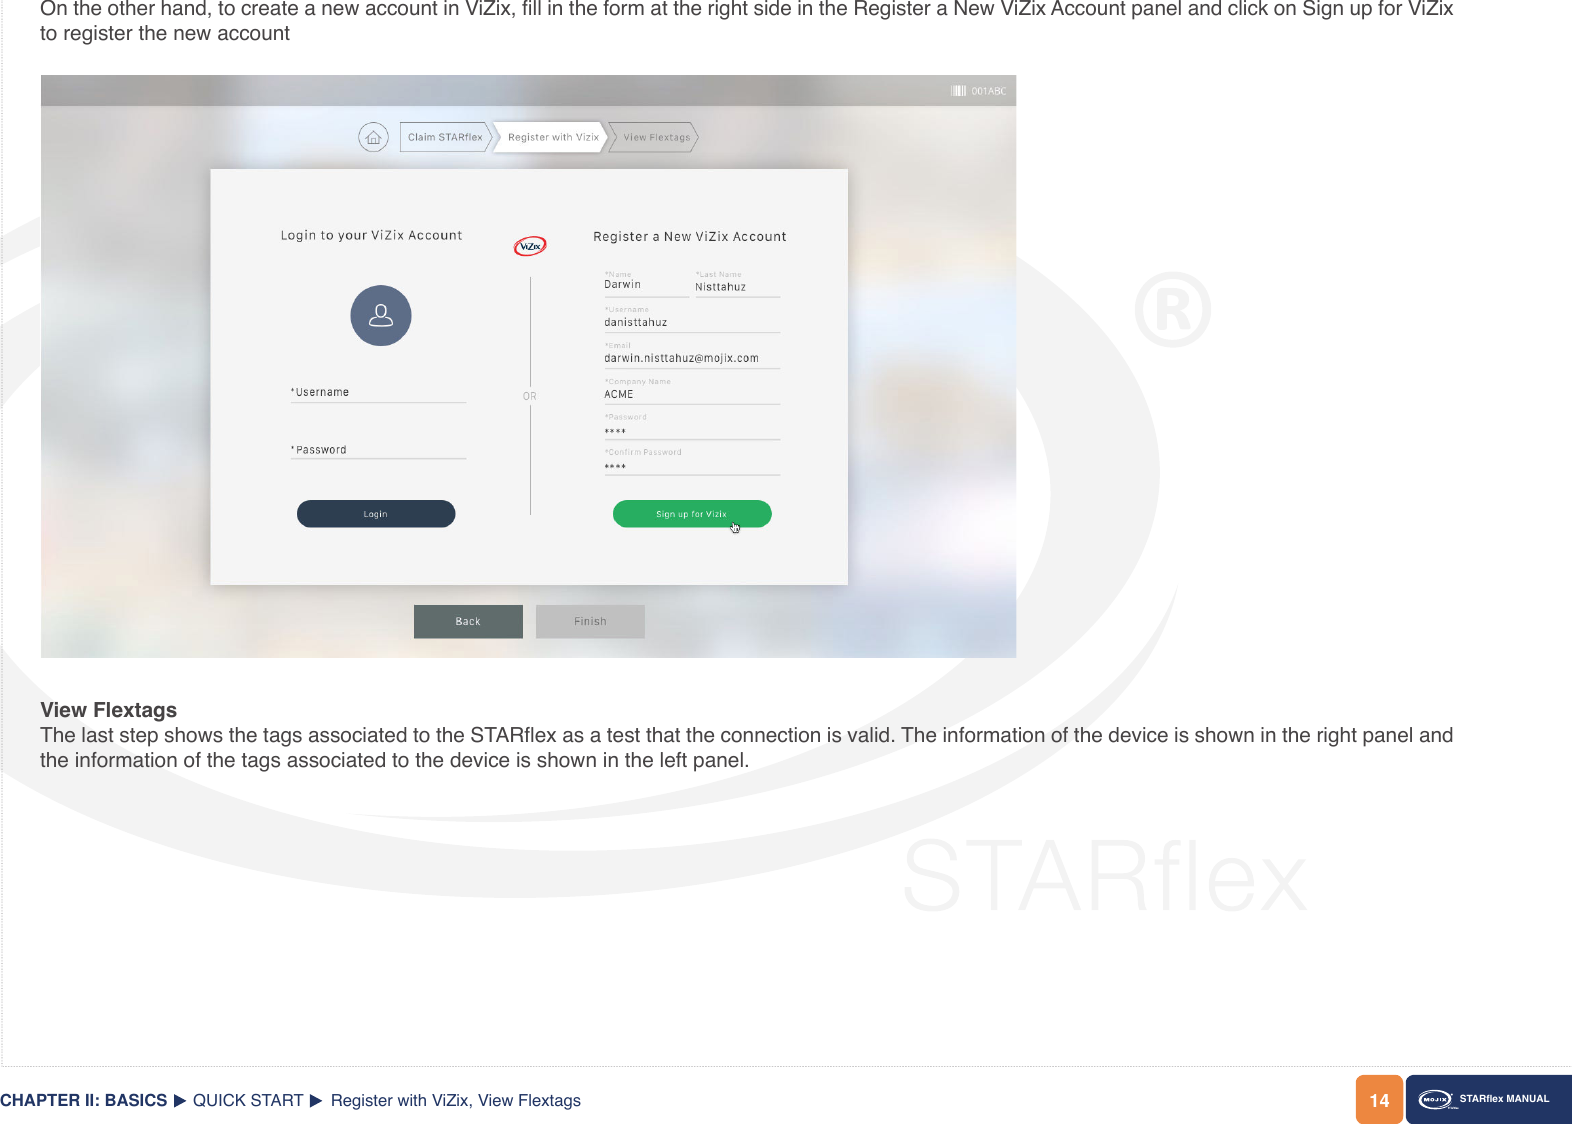 14CHAPTER II: BASICS STARex MANUALOn the other hand, to create a new account in ViZix, ll in the form at the right side in the Register a New ViZix Account panel and click on Sign up for ViZix to register the new accountView FlextagsThe last step shows the tags associated to the STARex as a test that the connection is valid. The information of the device is shown in the right panel and the information of the tags associated to the device is shown in the left panel.QUICK START Register with ViZix, View Flextags